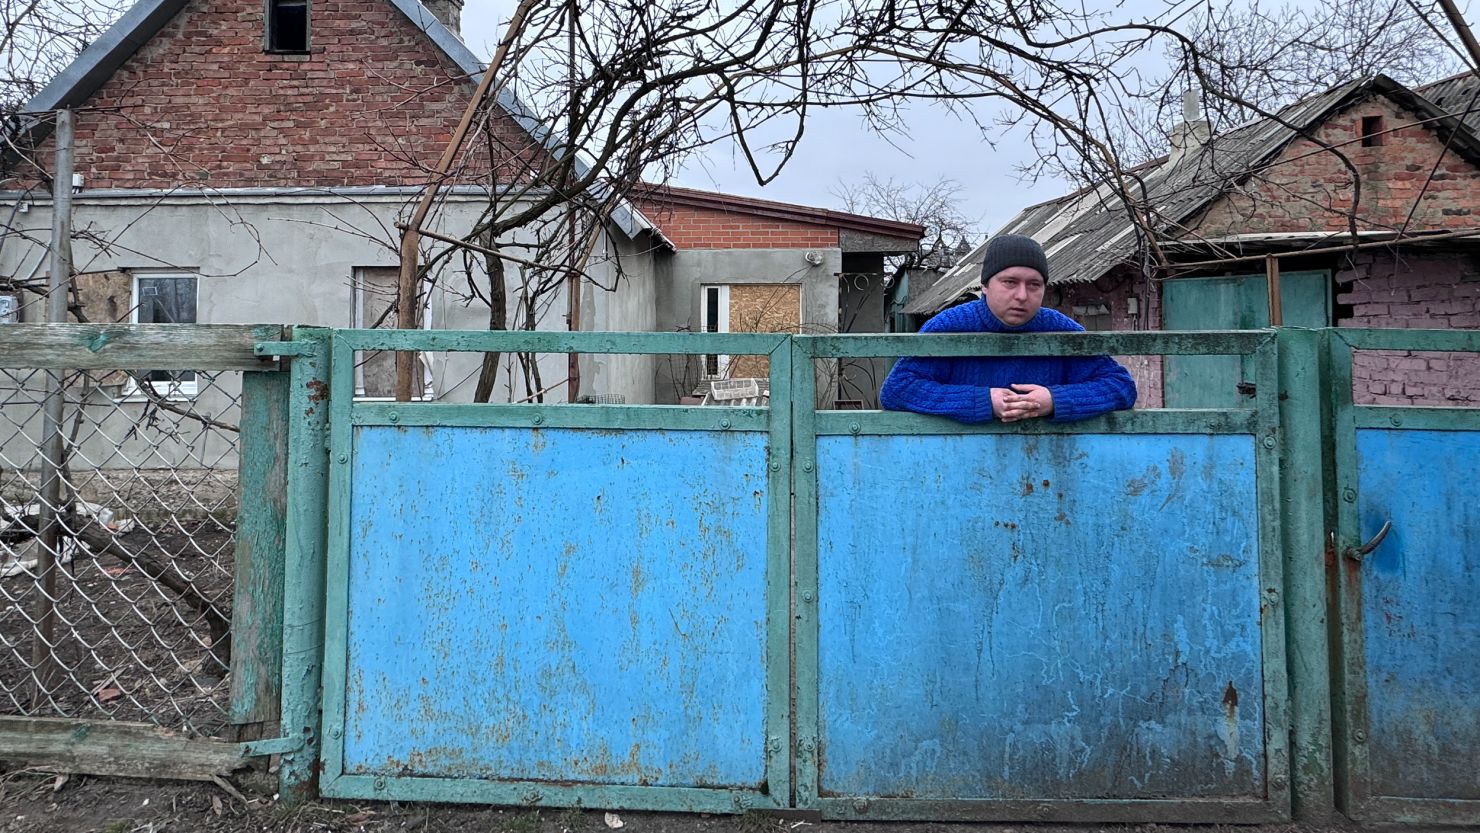 Euhene in Ocheretyne says he is ready to evacuated if the Russians come closer. The houses on either side of his have been hit by Russian shelling.